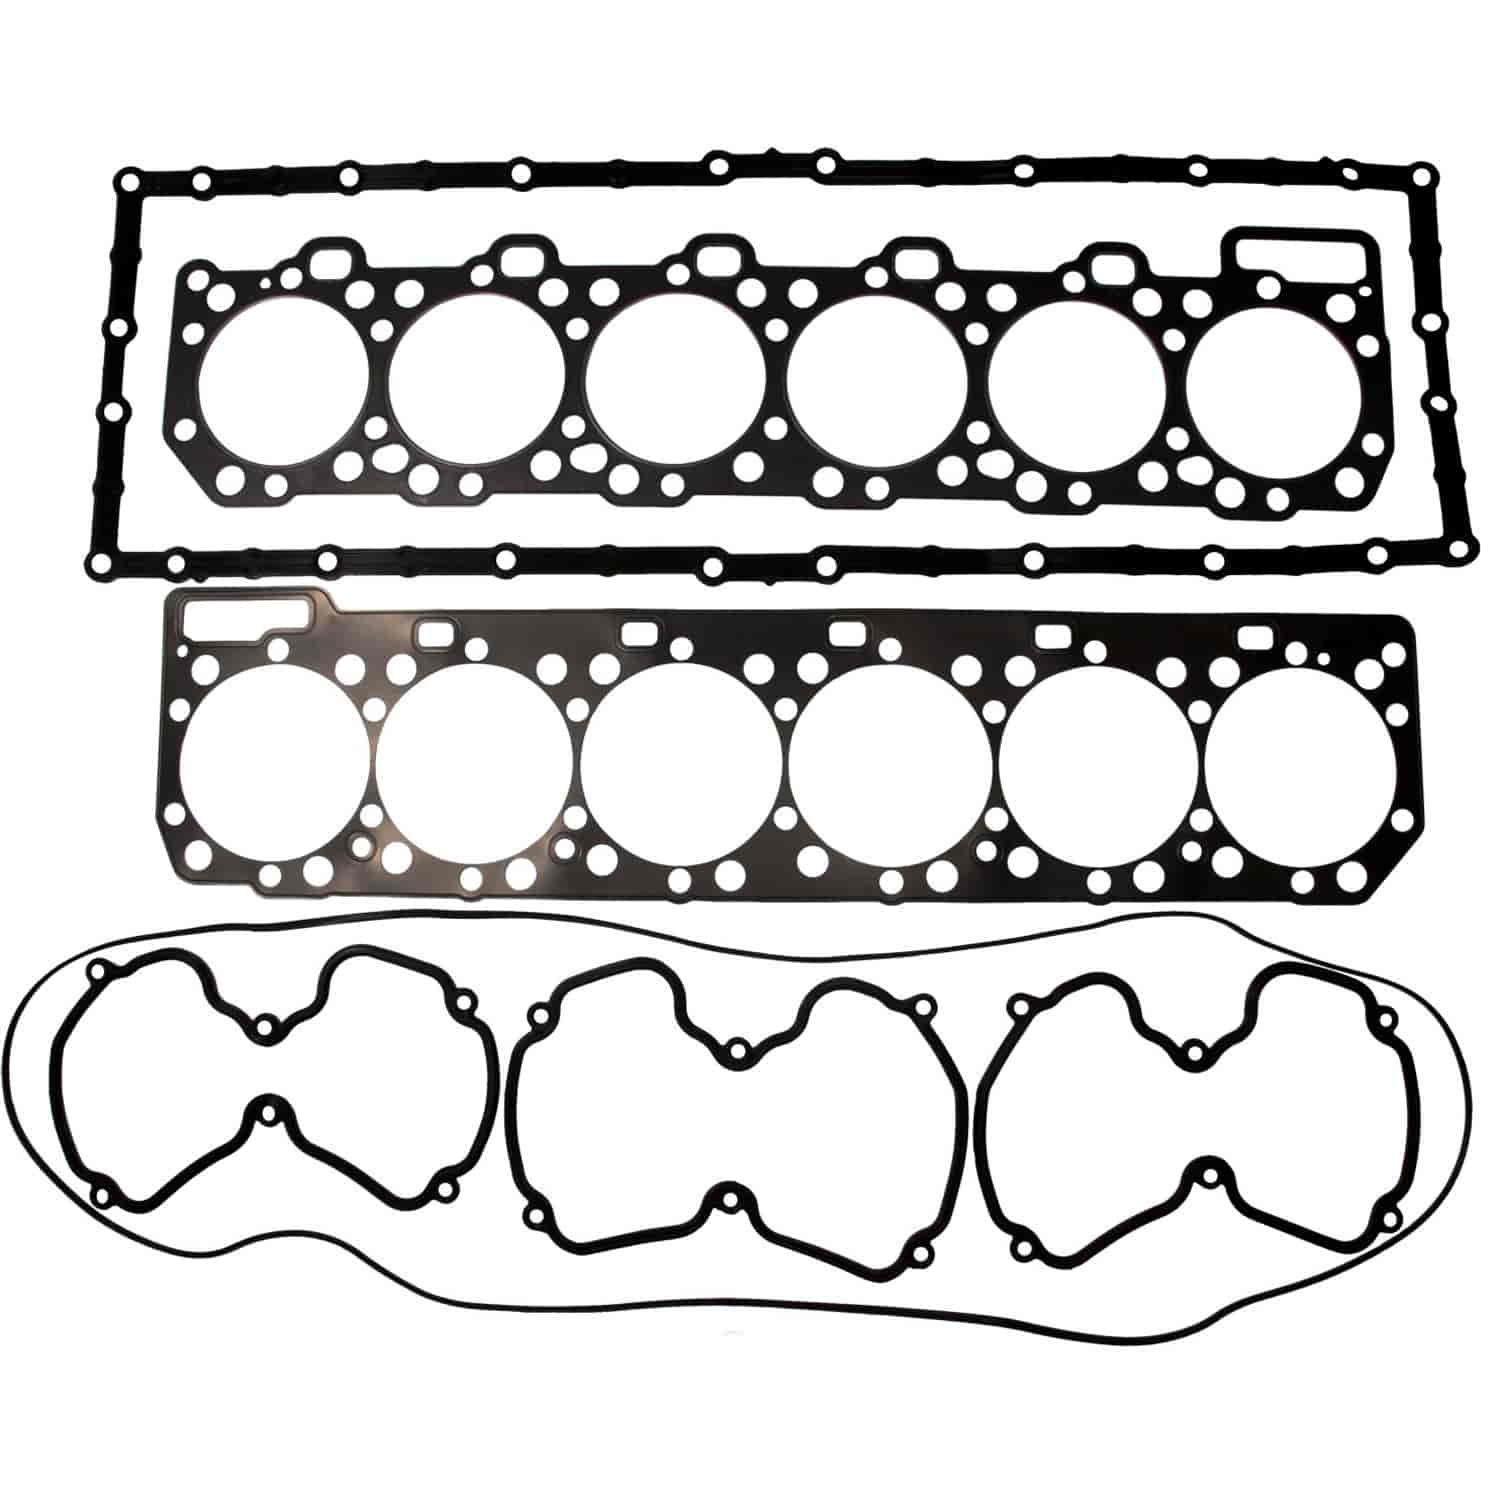 In-Frame Overhaul Set Caterpillar Truck In-Frame Gasket Kit for C15 Engines with Isolation Seal